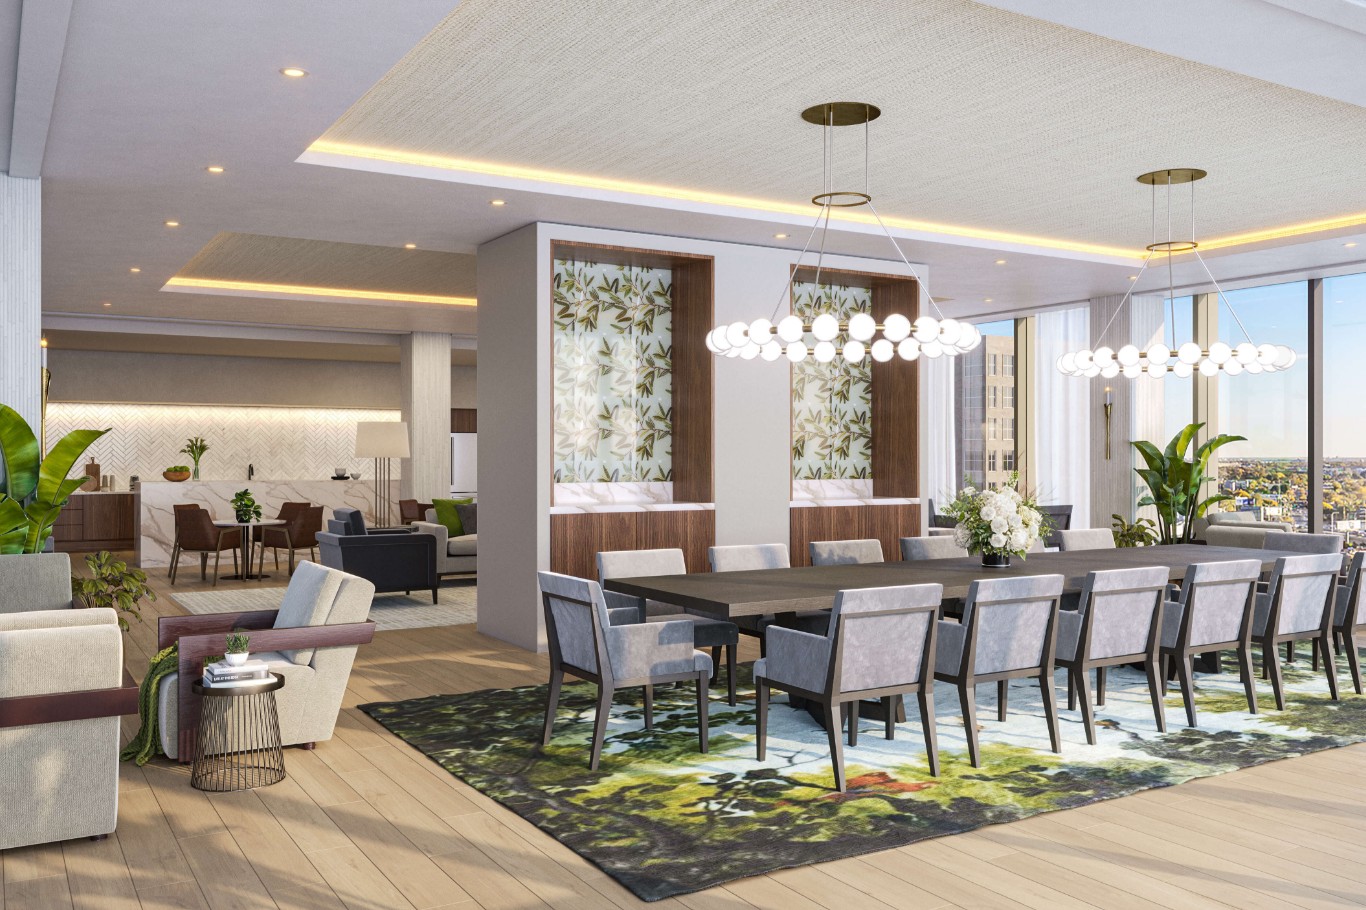 A rendering of a Senior Living dining room with a view of the city.